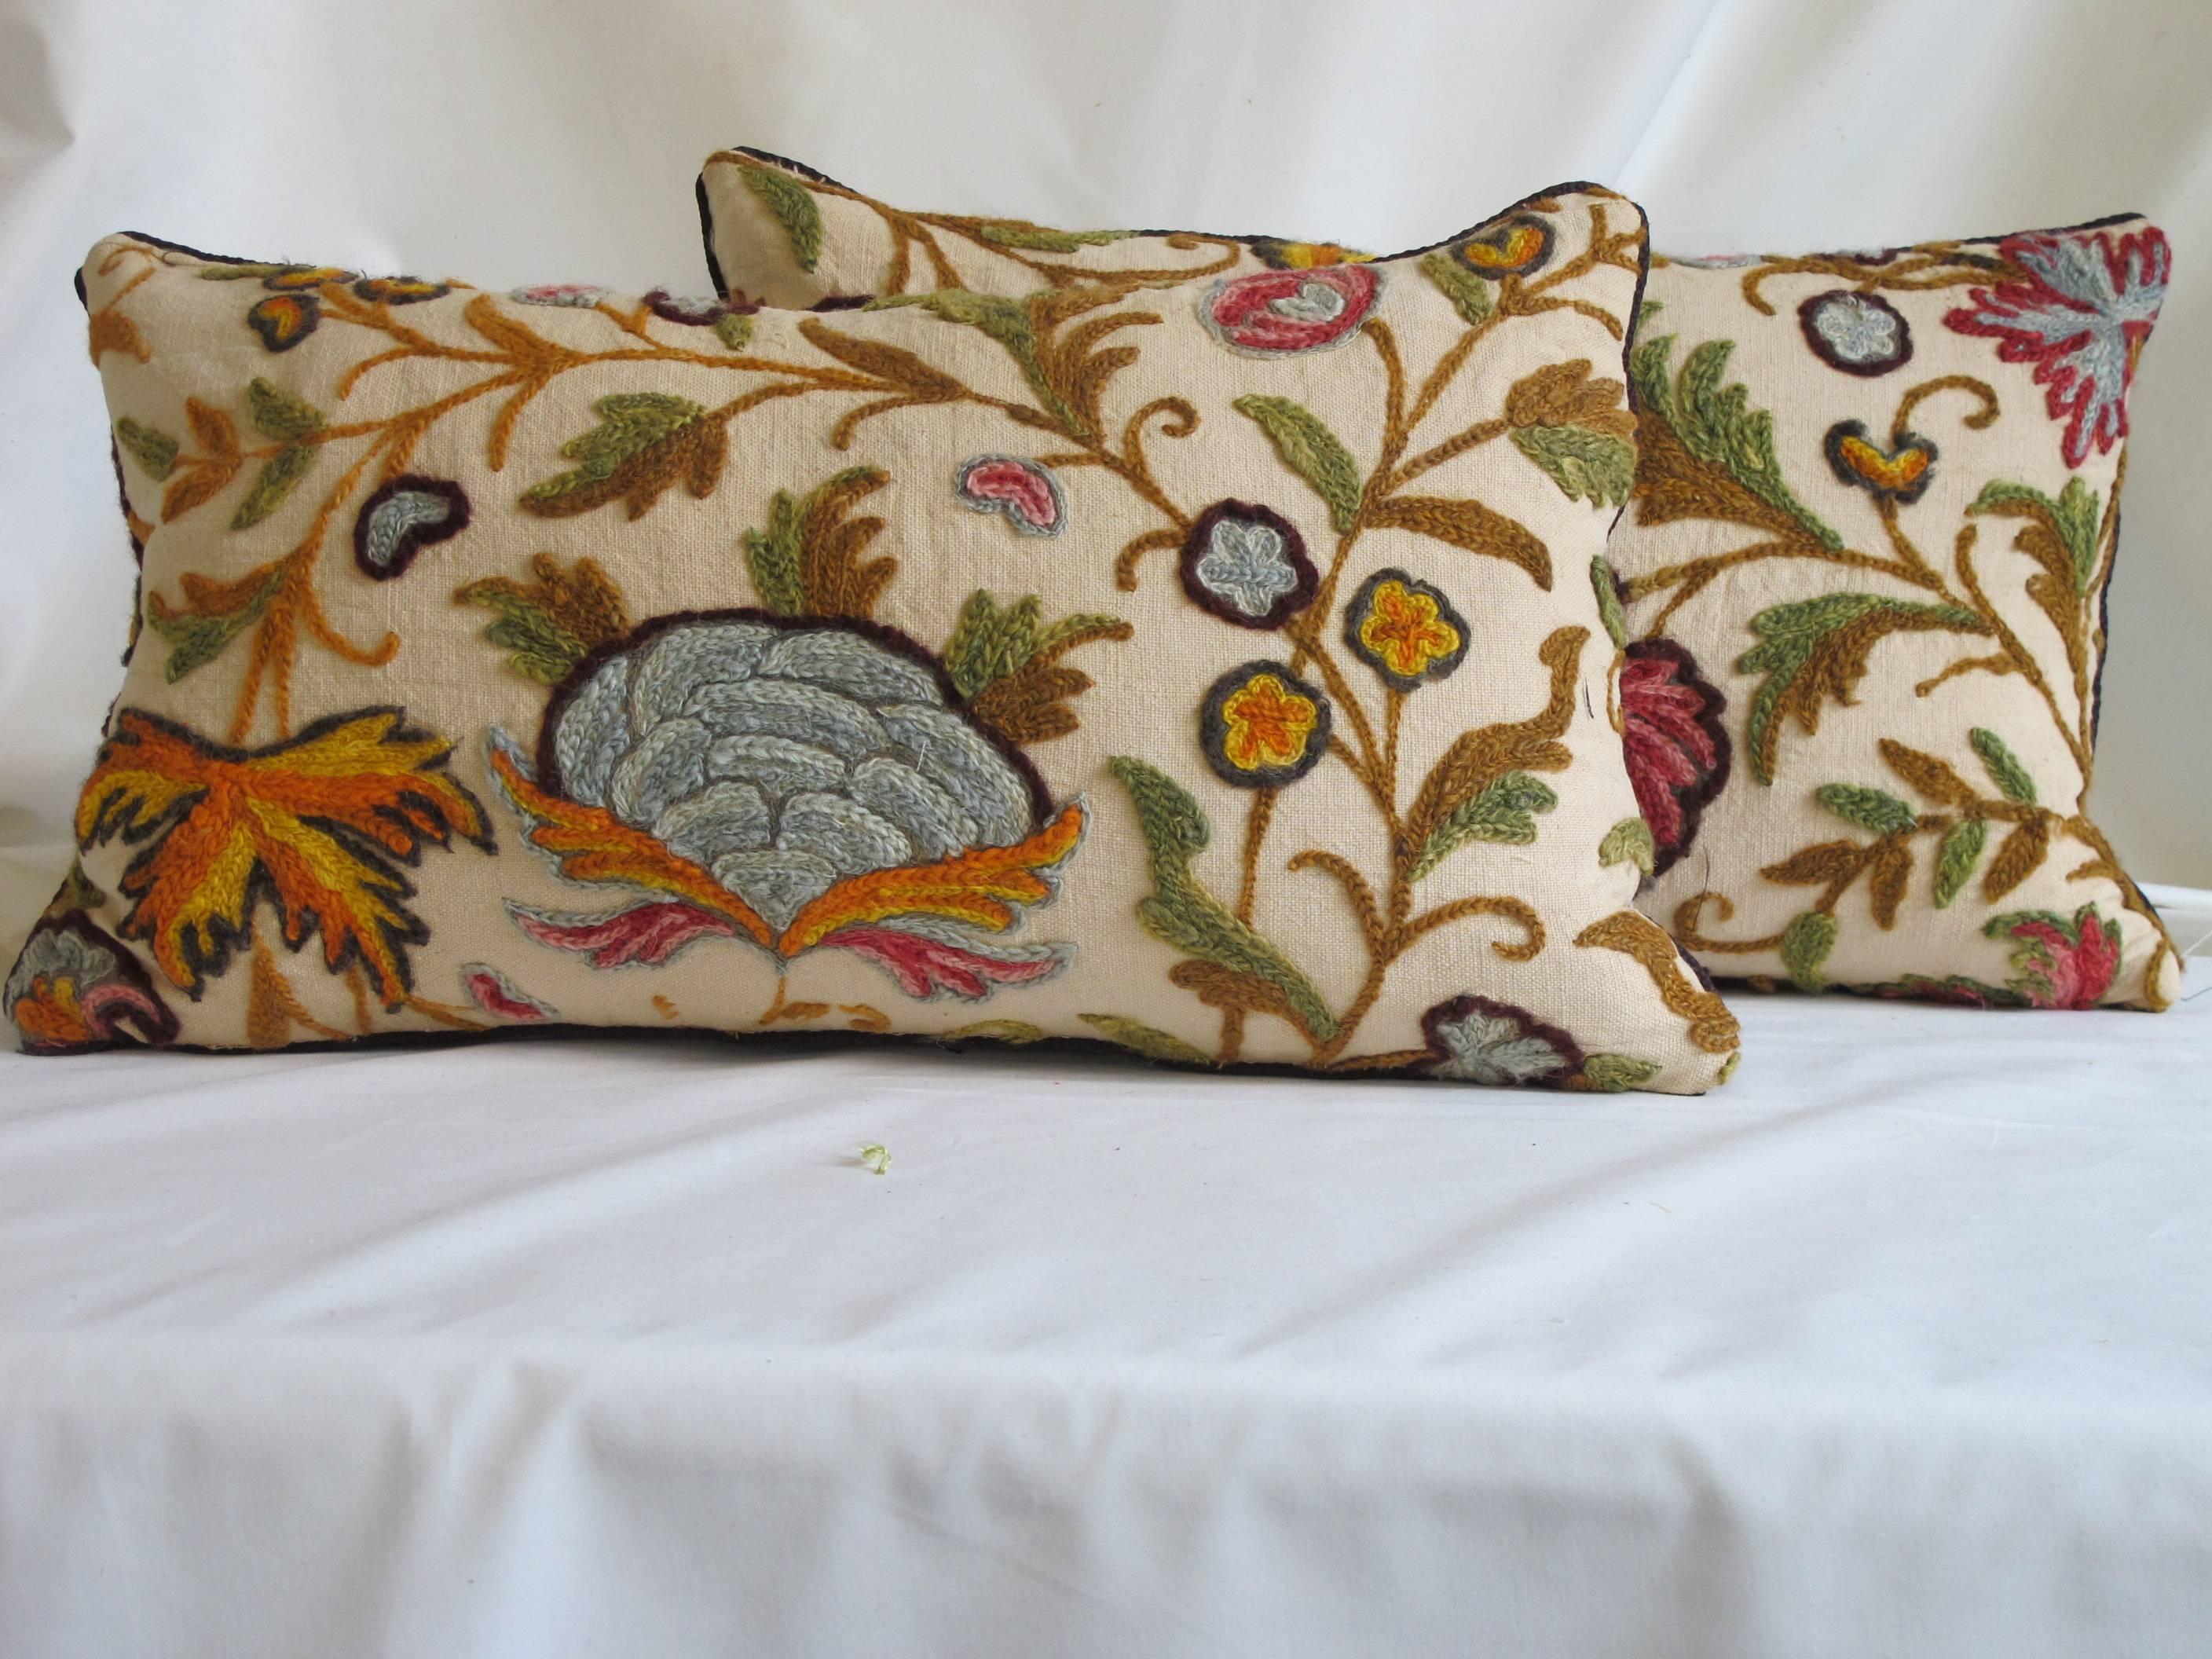 Lovely pair of pillows made from a circa 1950s hand-stitched crewel, in vibrant multi colors, backed with a coordinating velvet, hidden zipper closure, down insert included.